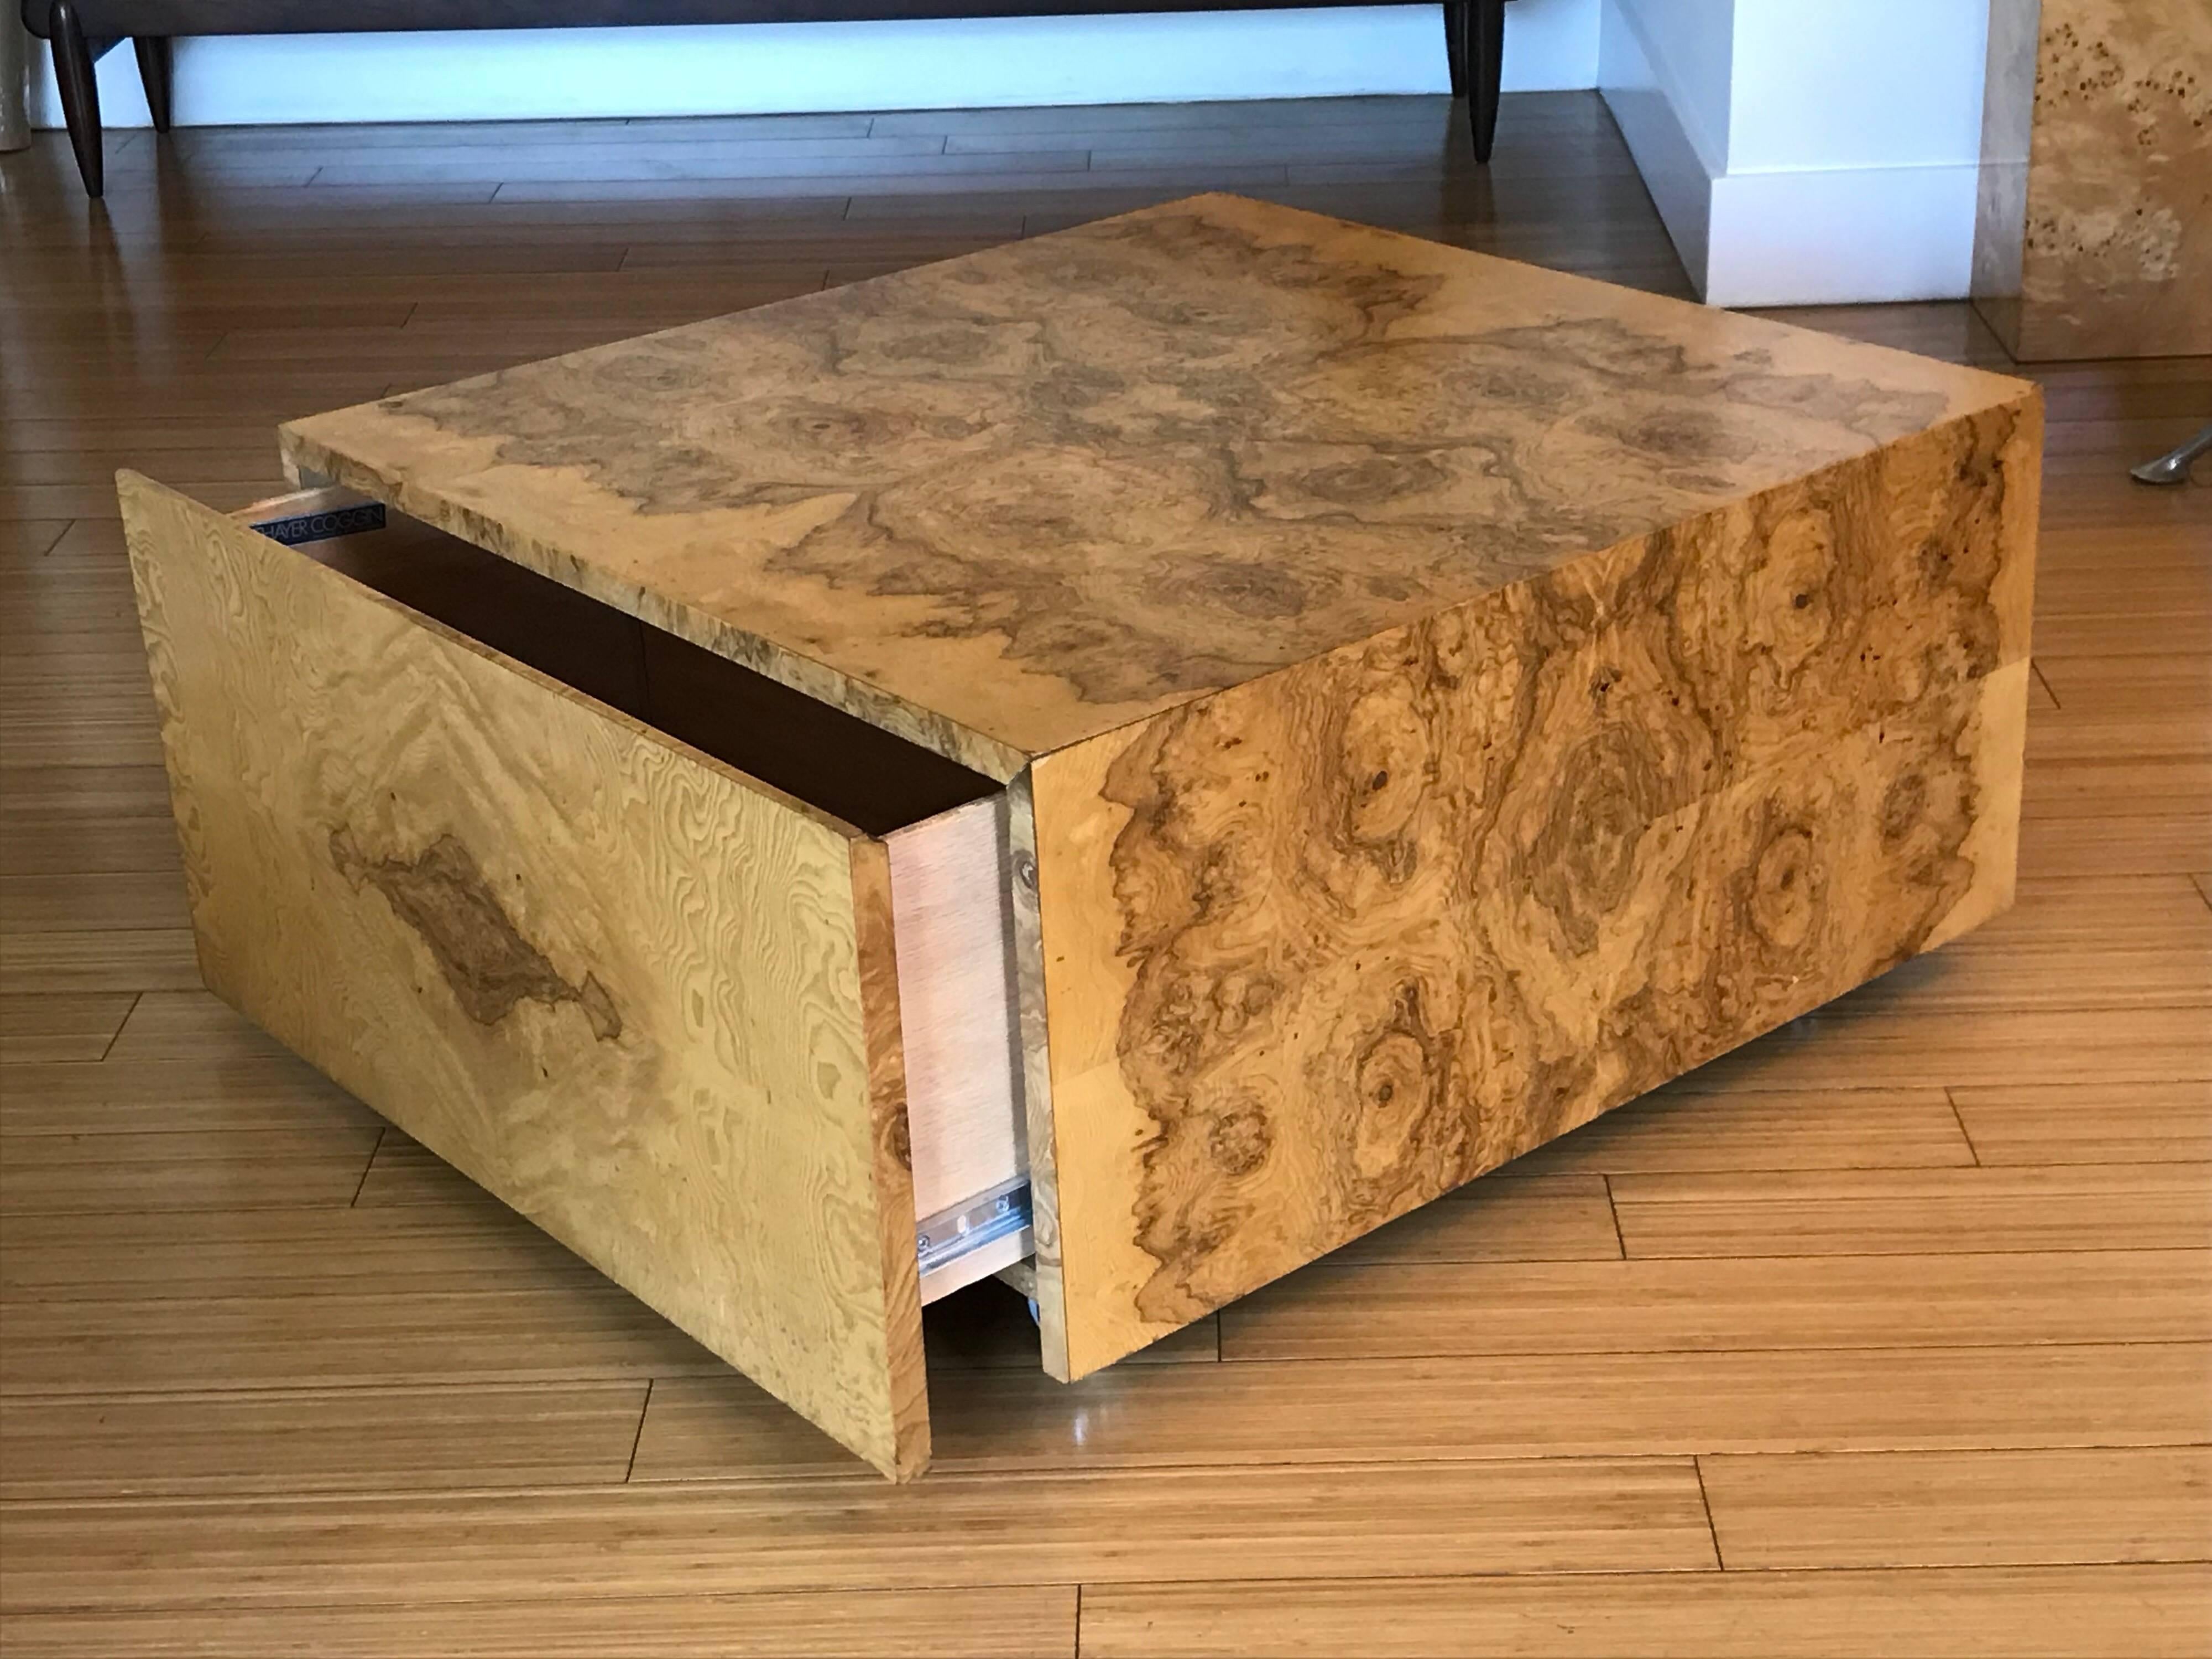 A nice architectural design.
Quality made of wood (no press-board) with wonderfully grained burl wood veneer.
It's in the original vintage condition with minute ware, nothing major.
Great to use as an end table to store sofa blankets.